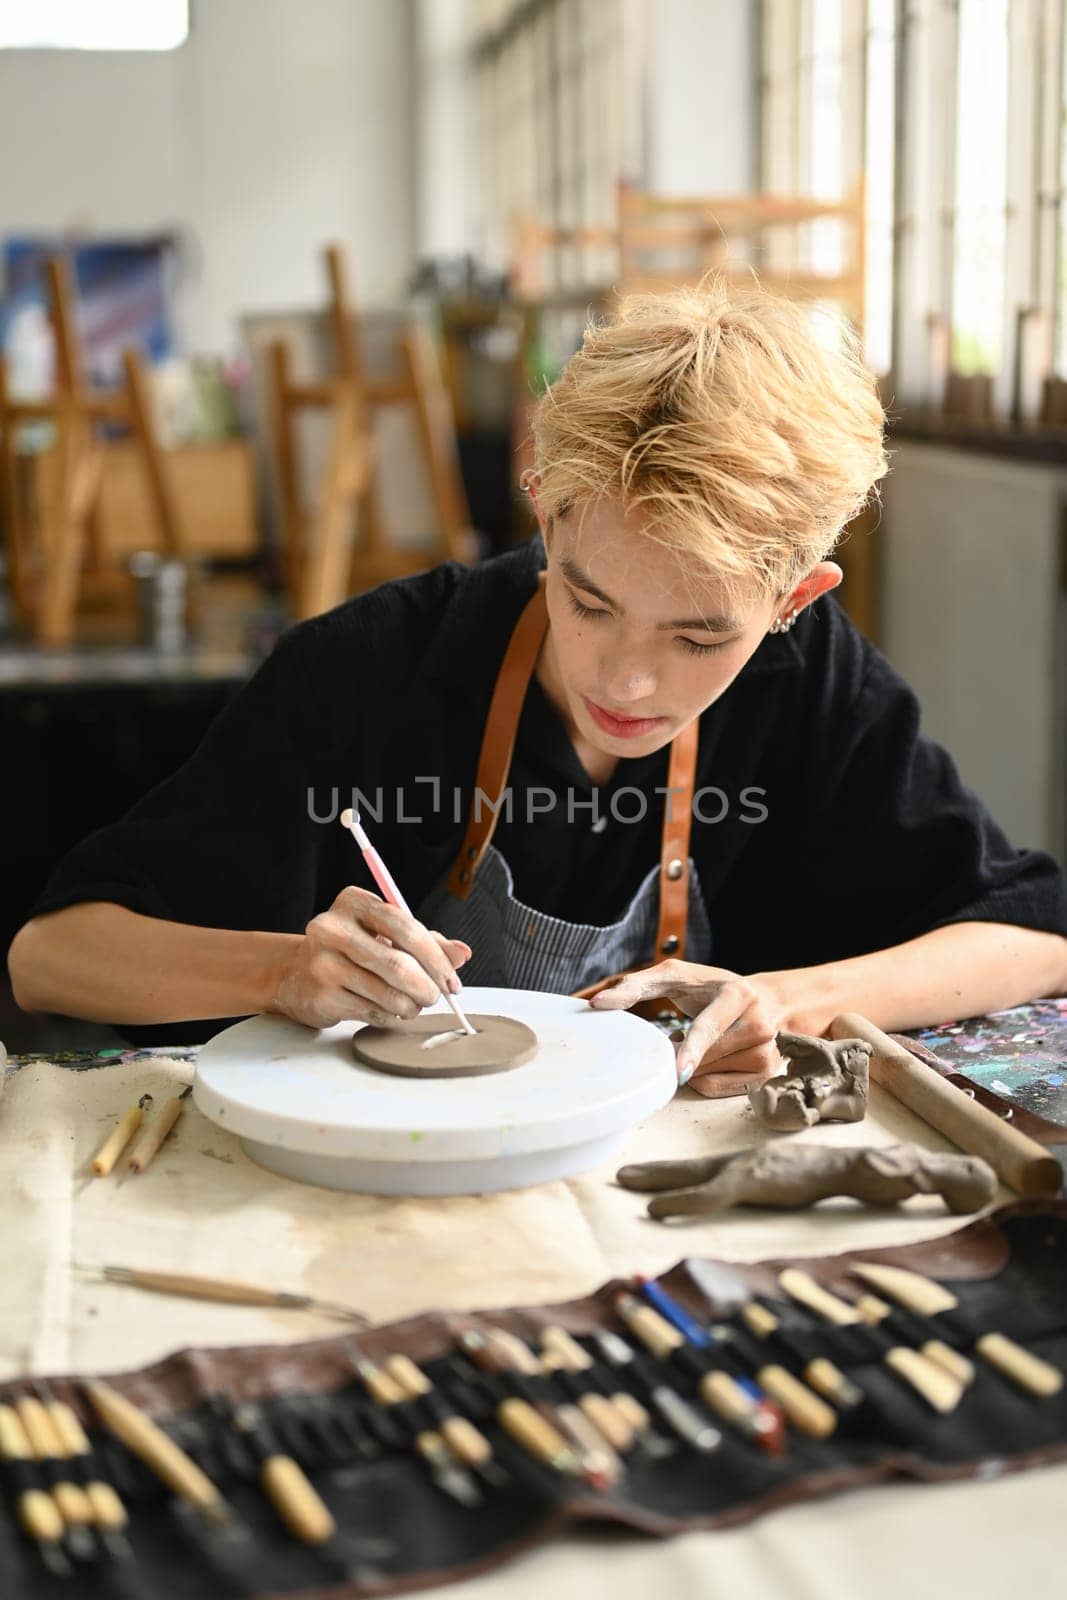 Focused man pottery artist decorating clay plate on table at ceramic workshop. Indoors lifestyle activity and hobbies concept by prathanchorruangsak